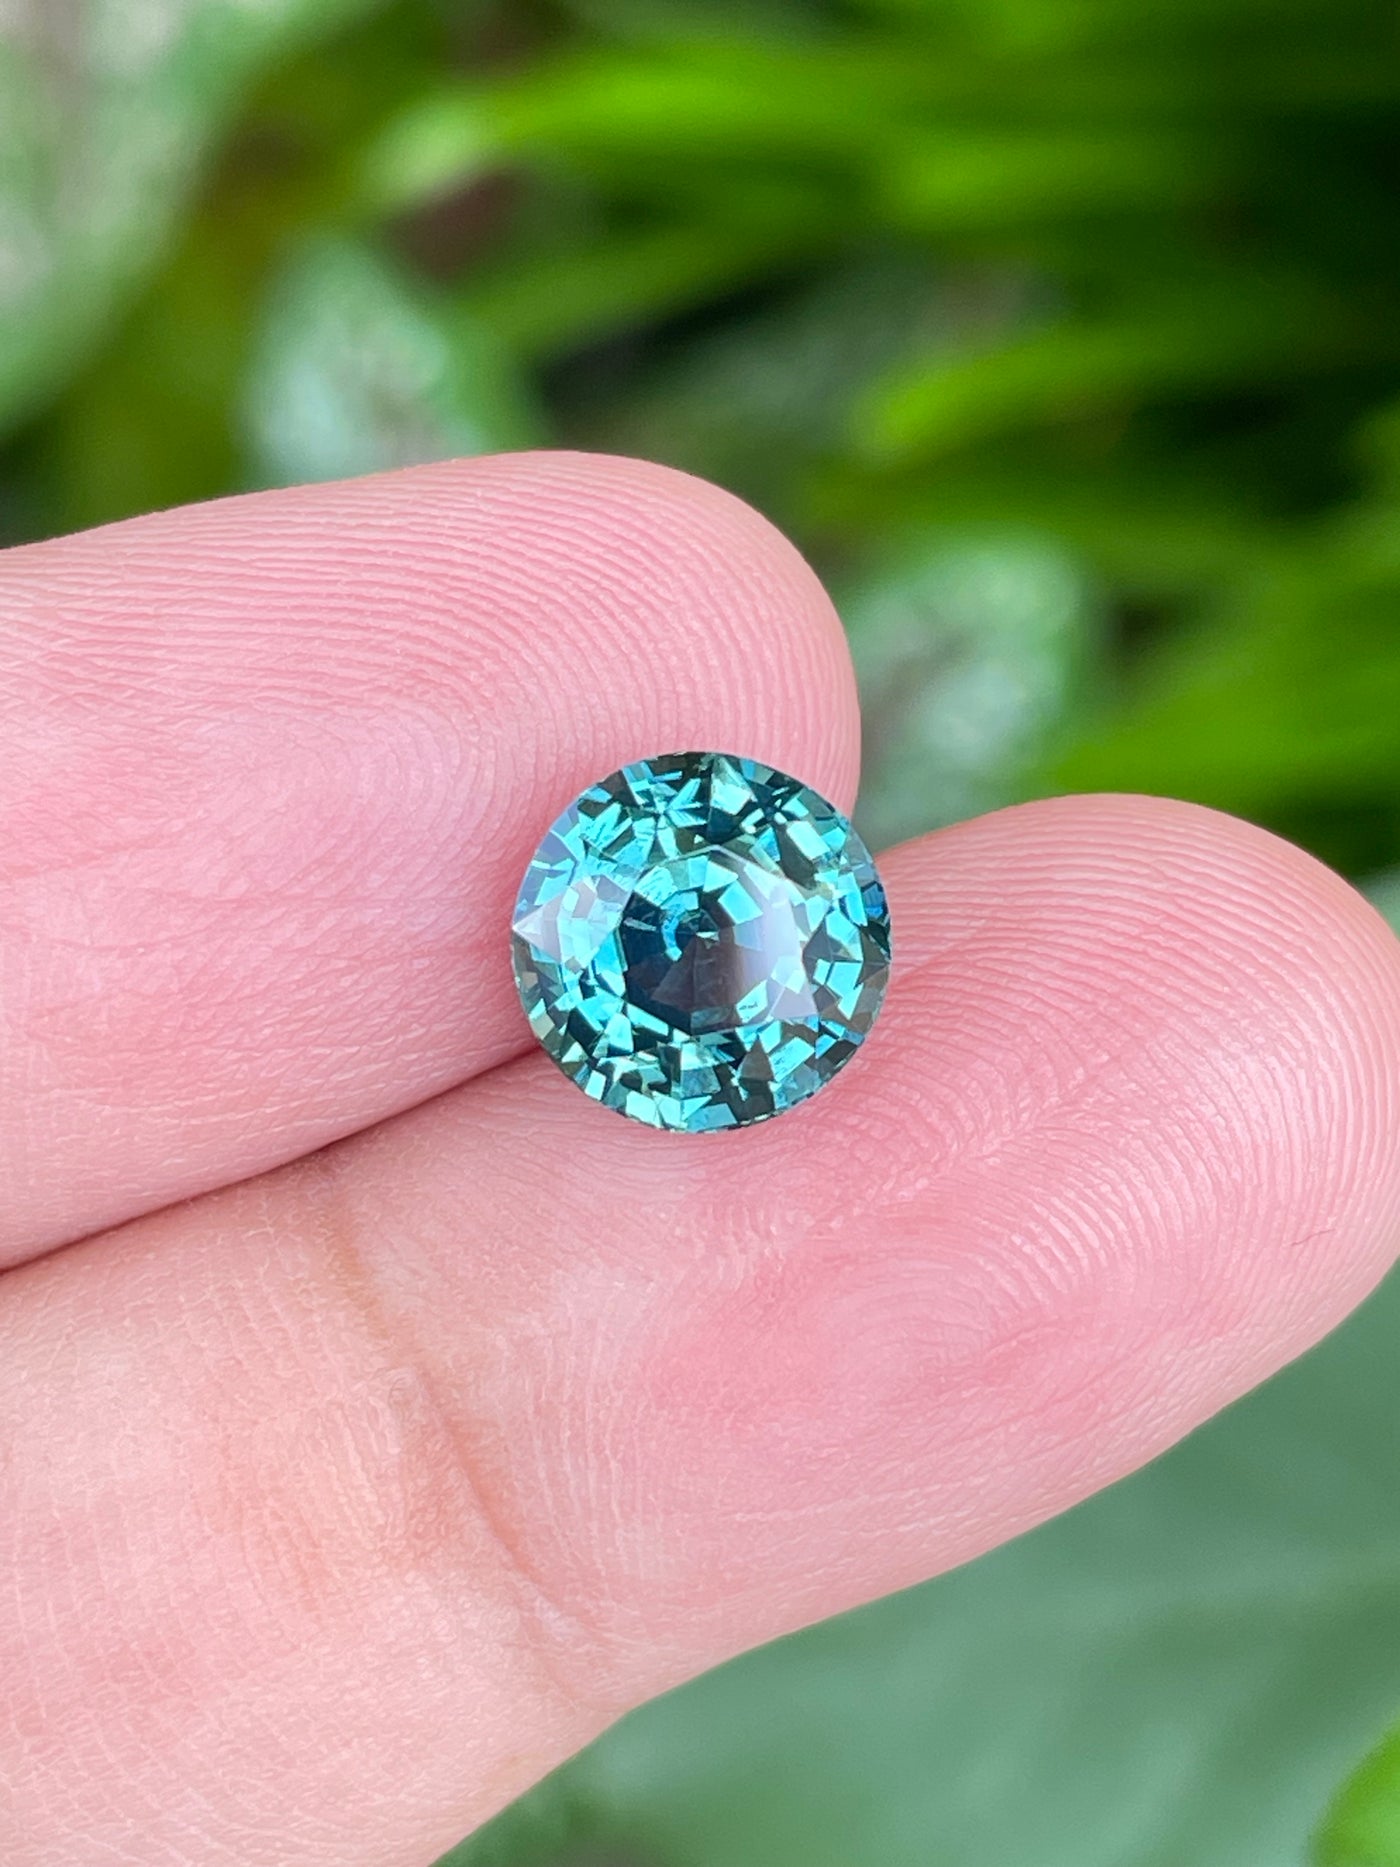 Teal Sapphire 3.58 CT